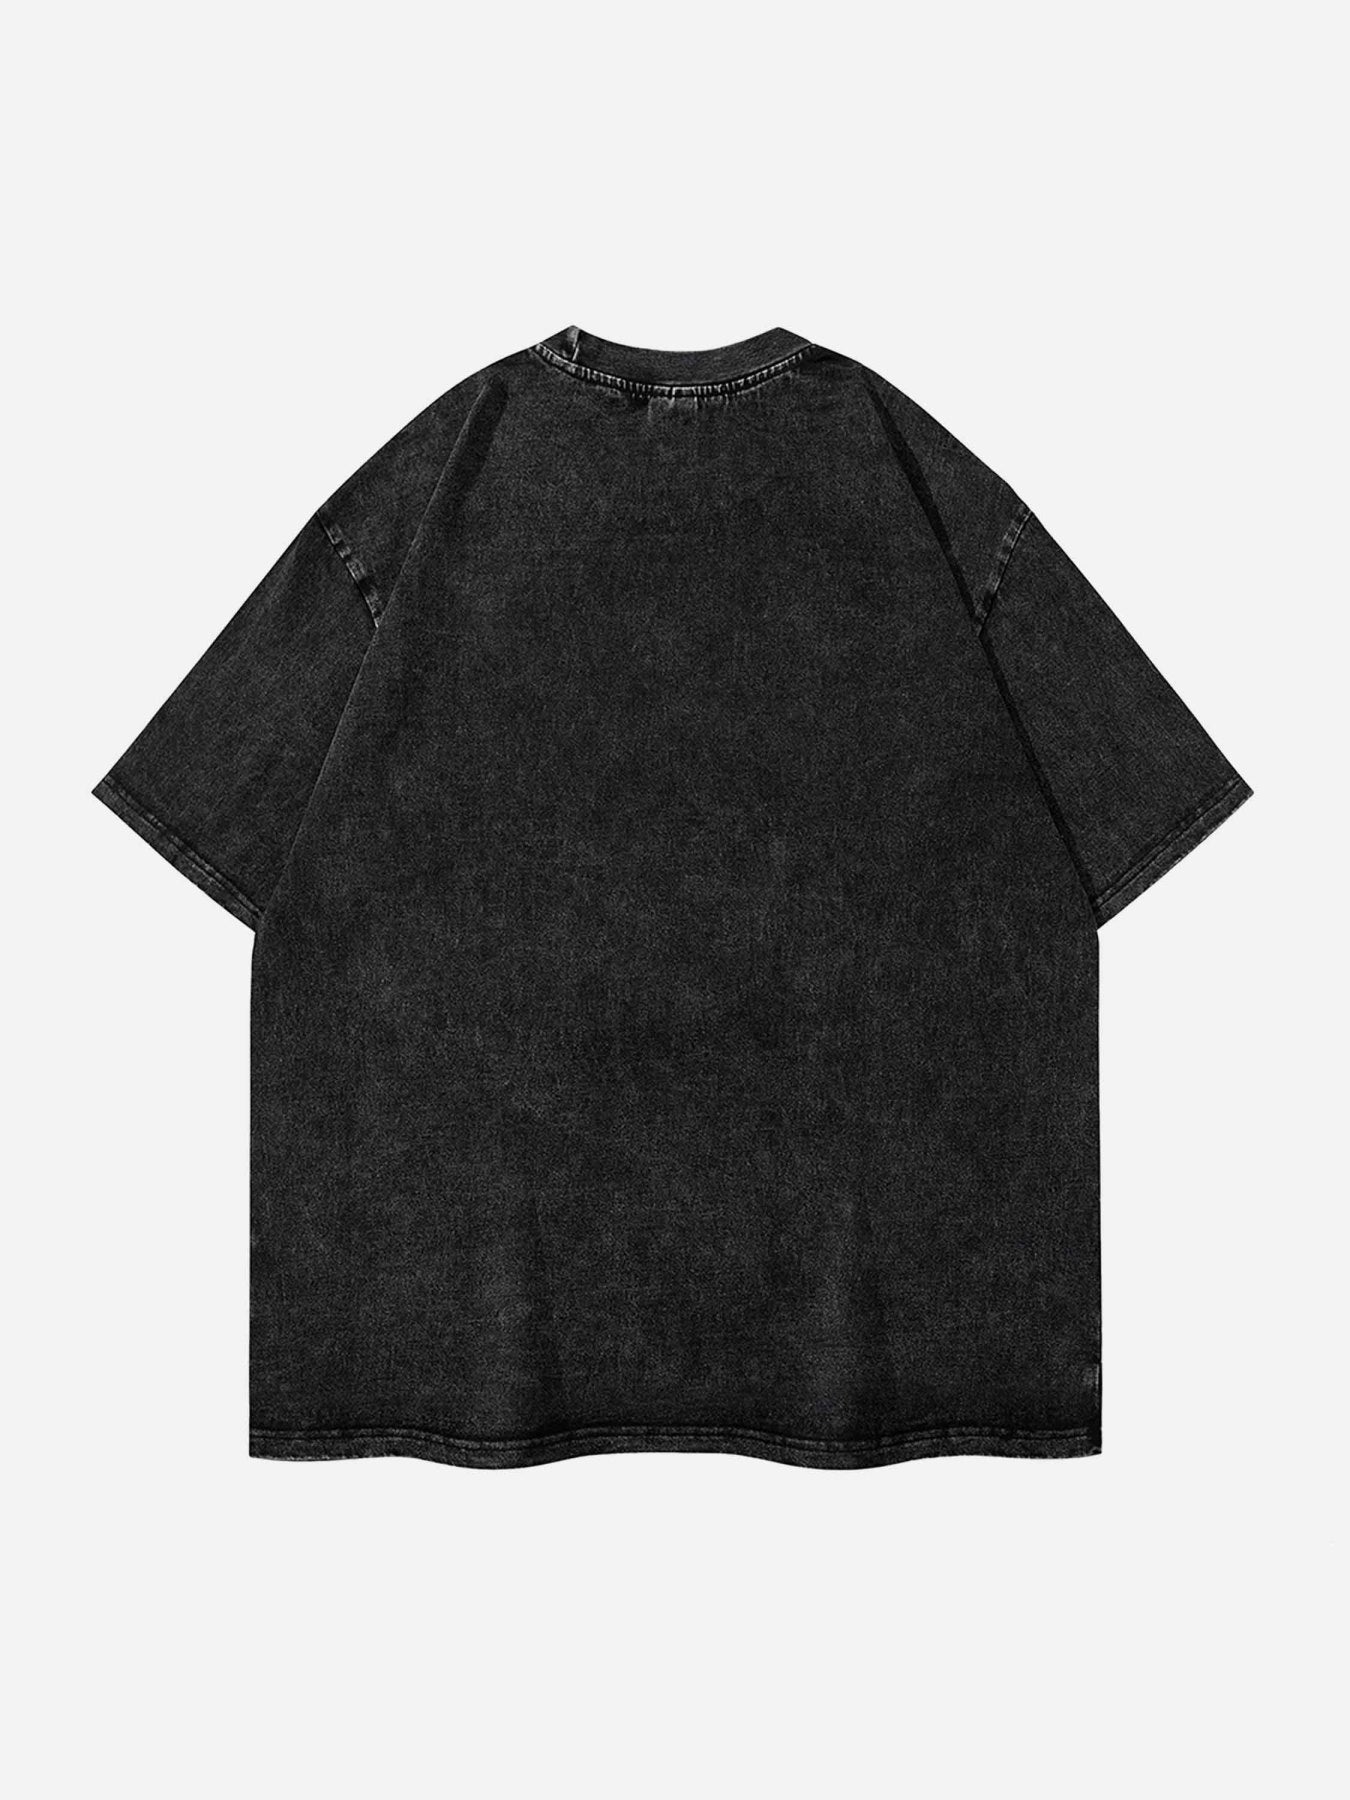 The Supermade Dark Hip-hop Washed And Worn Loose T-shirt